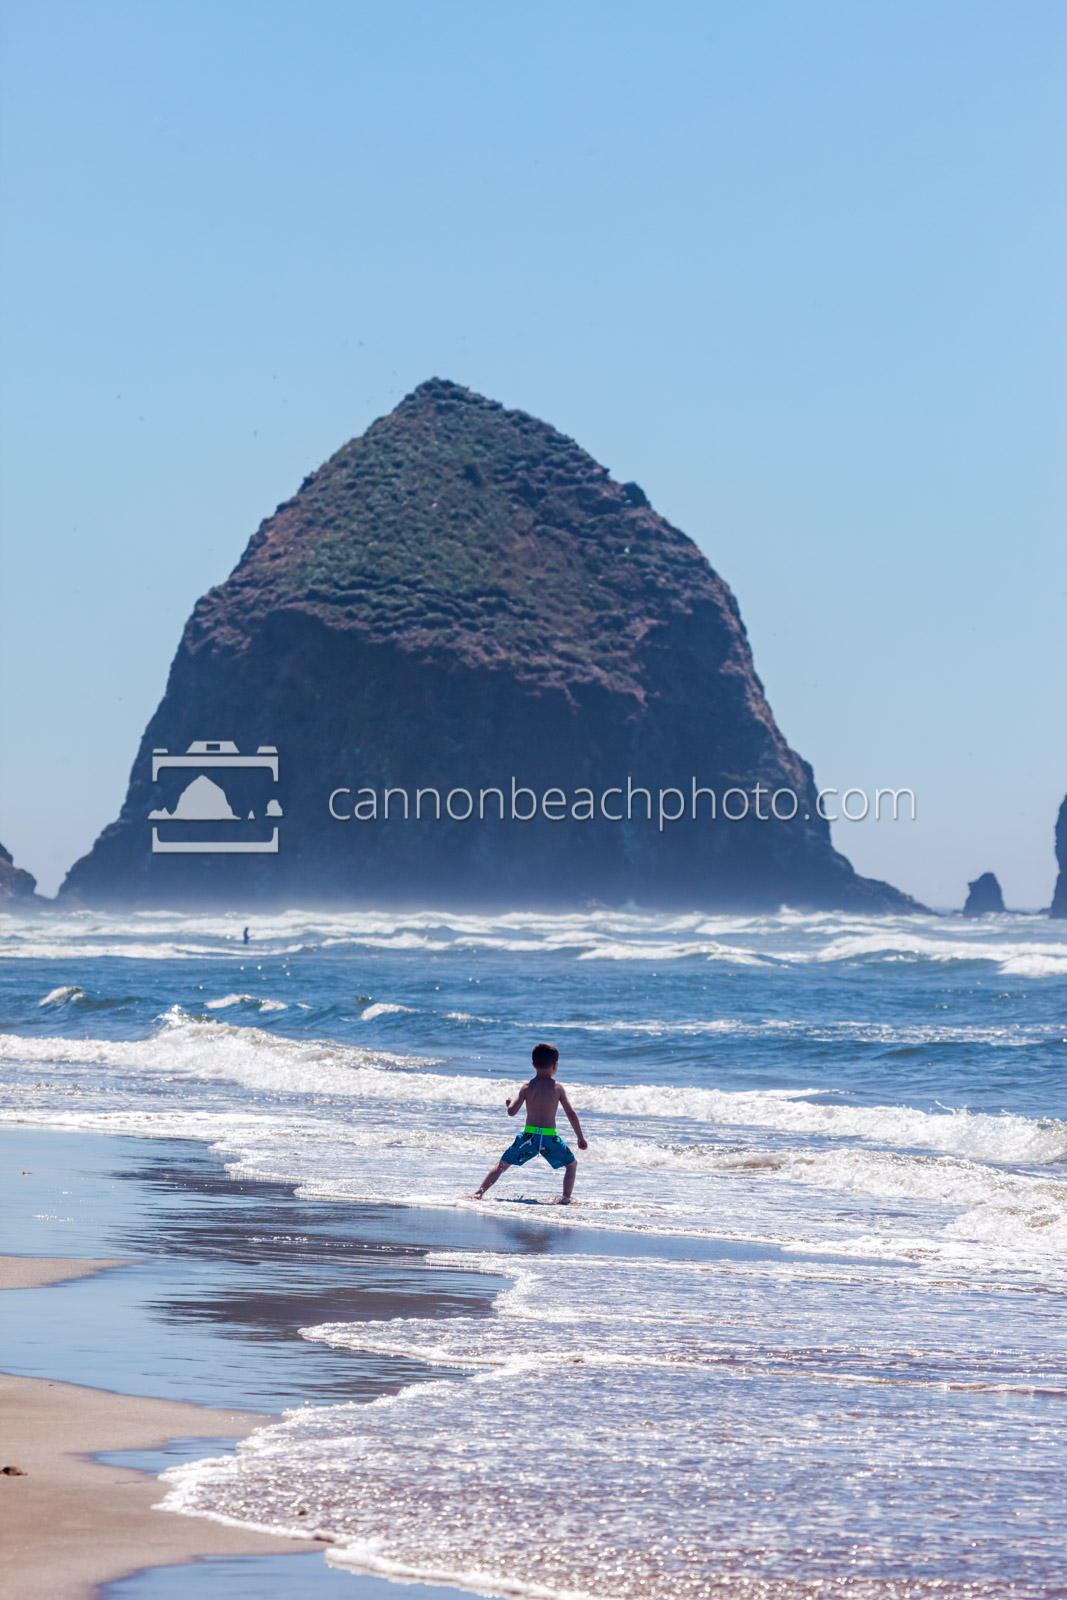 Children Playing on the Shoreline with Haystack Rock 4